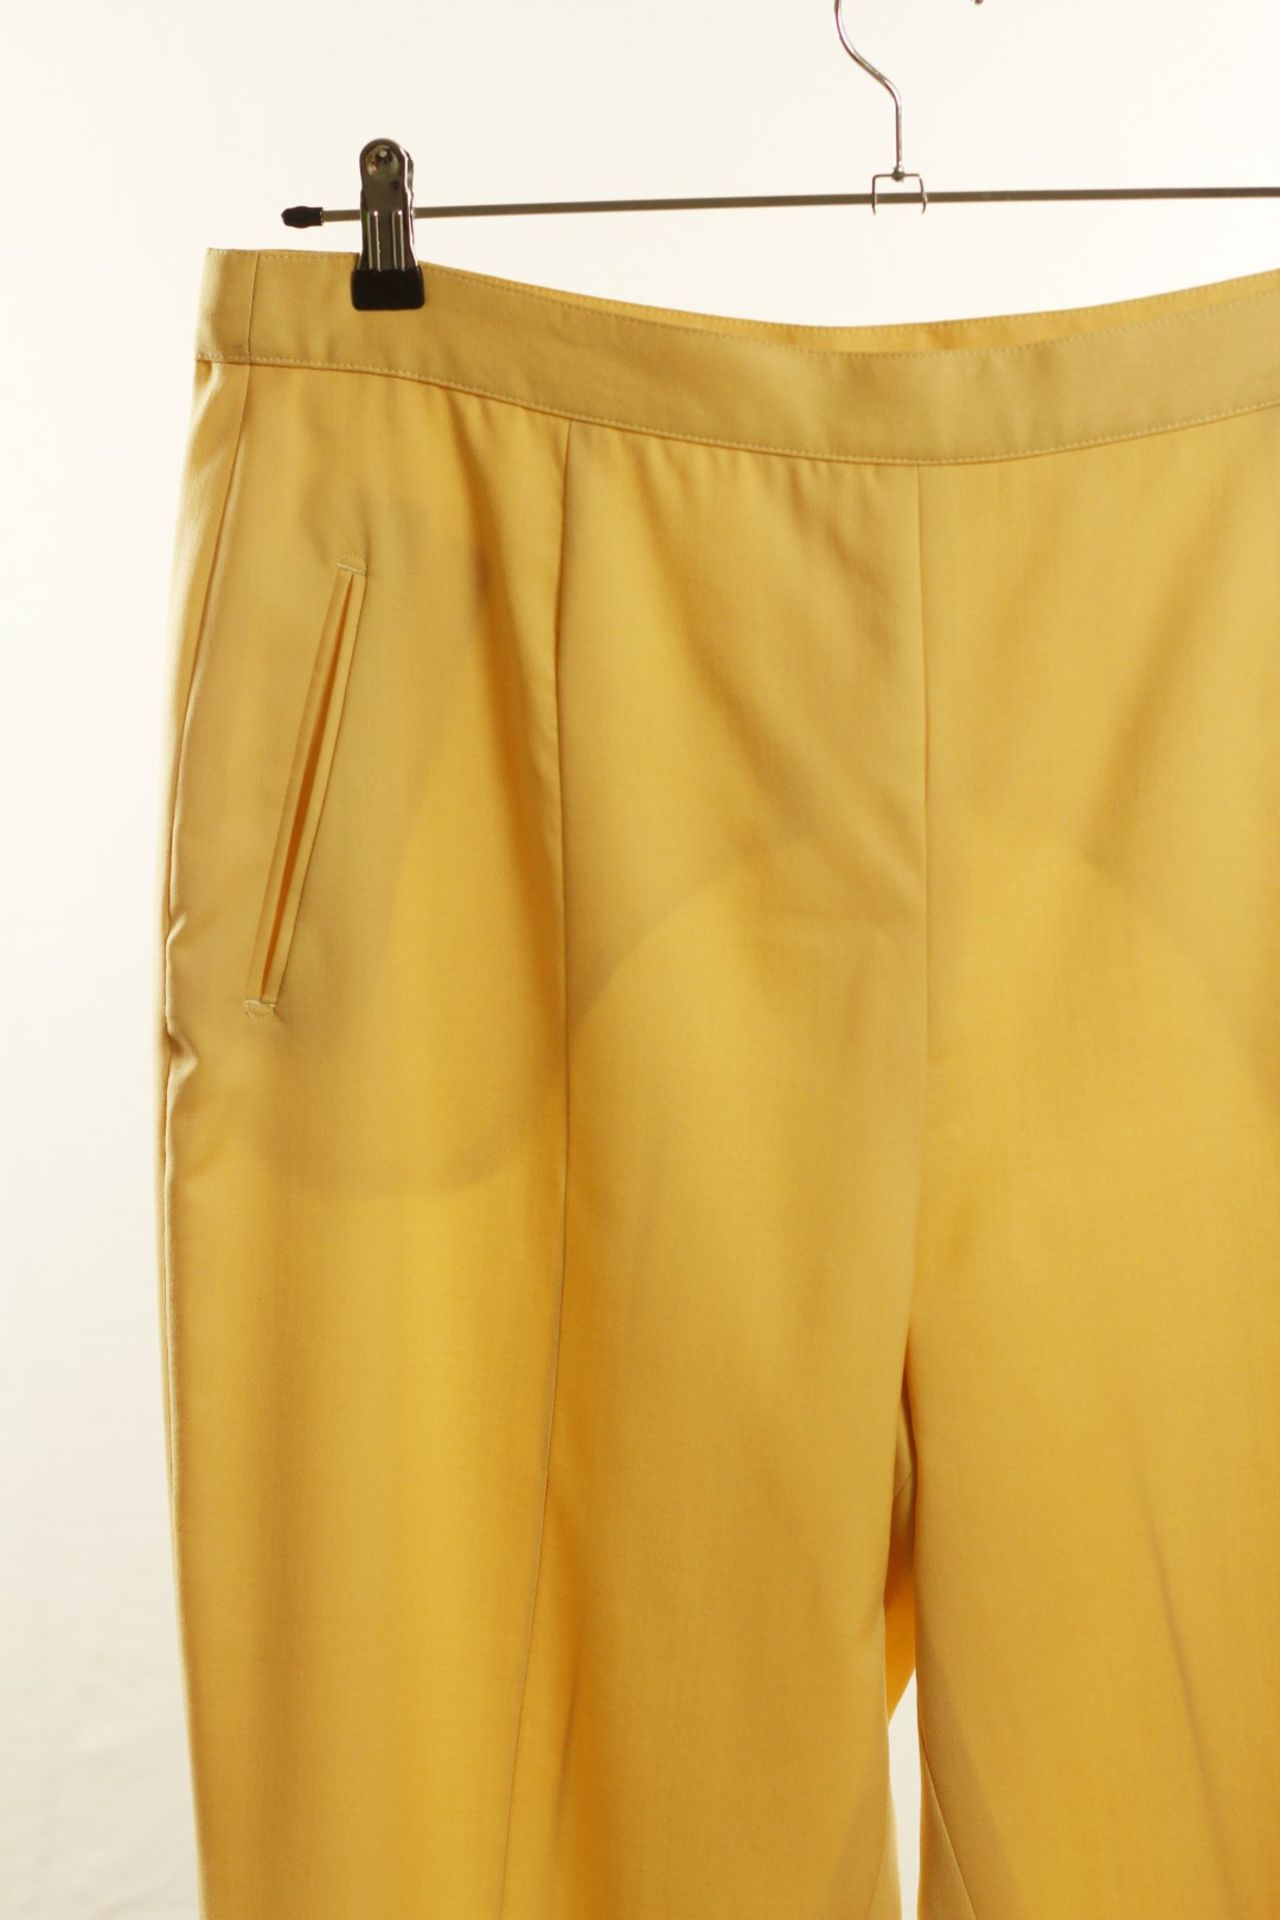 1 x Artico Cream Trousers - Size: 18 - Material: 100% Leather. Lining 50% viscose, 50% Acetate - - Image 2 of 9